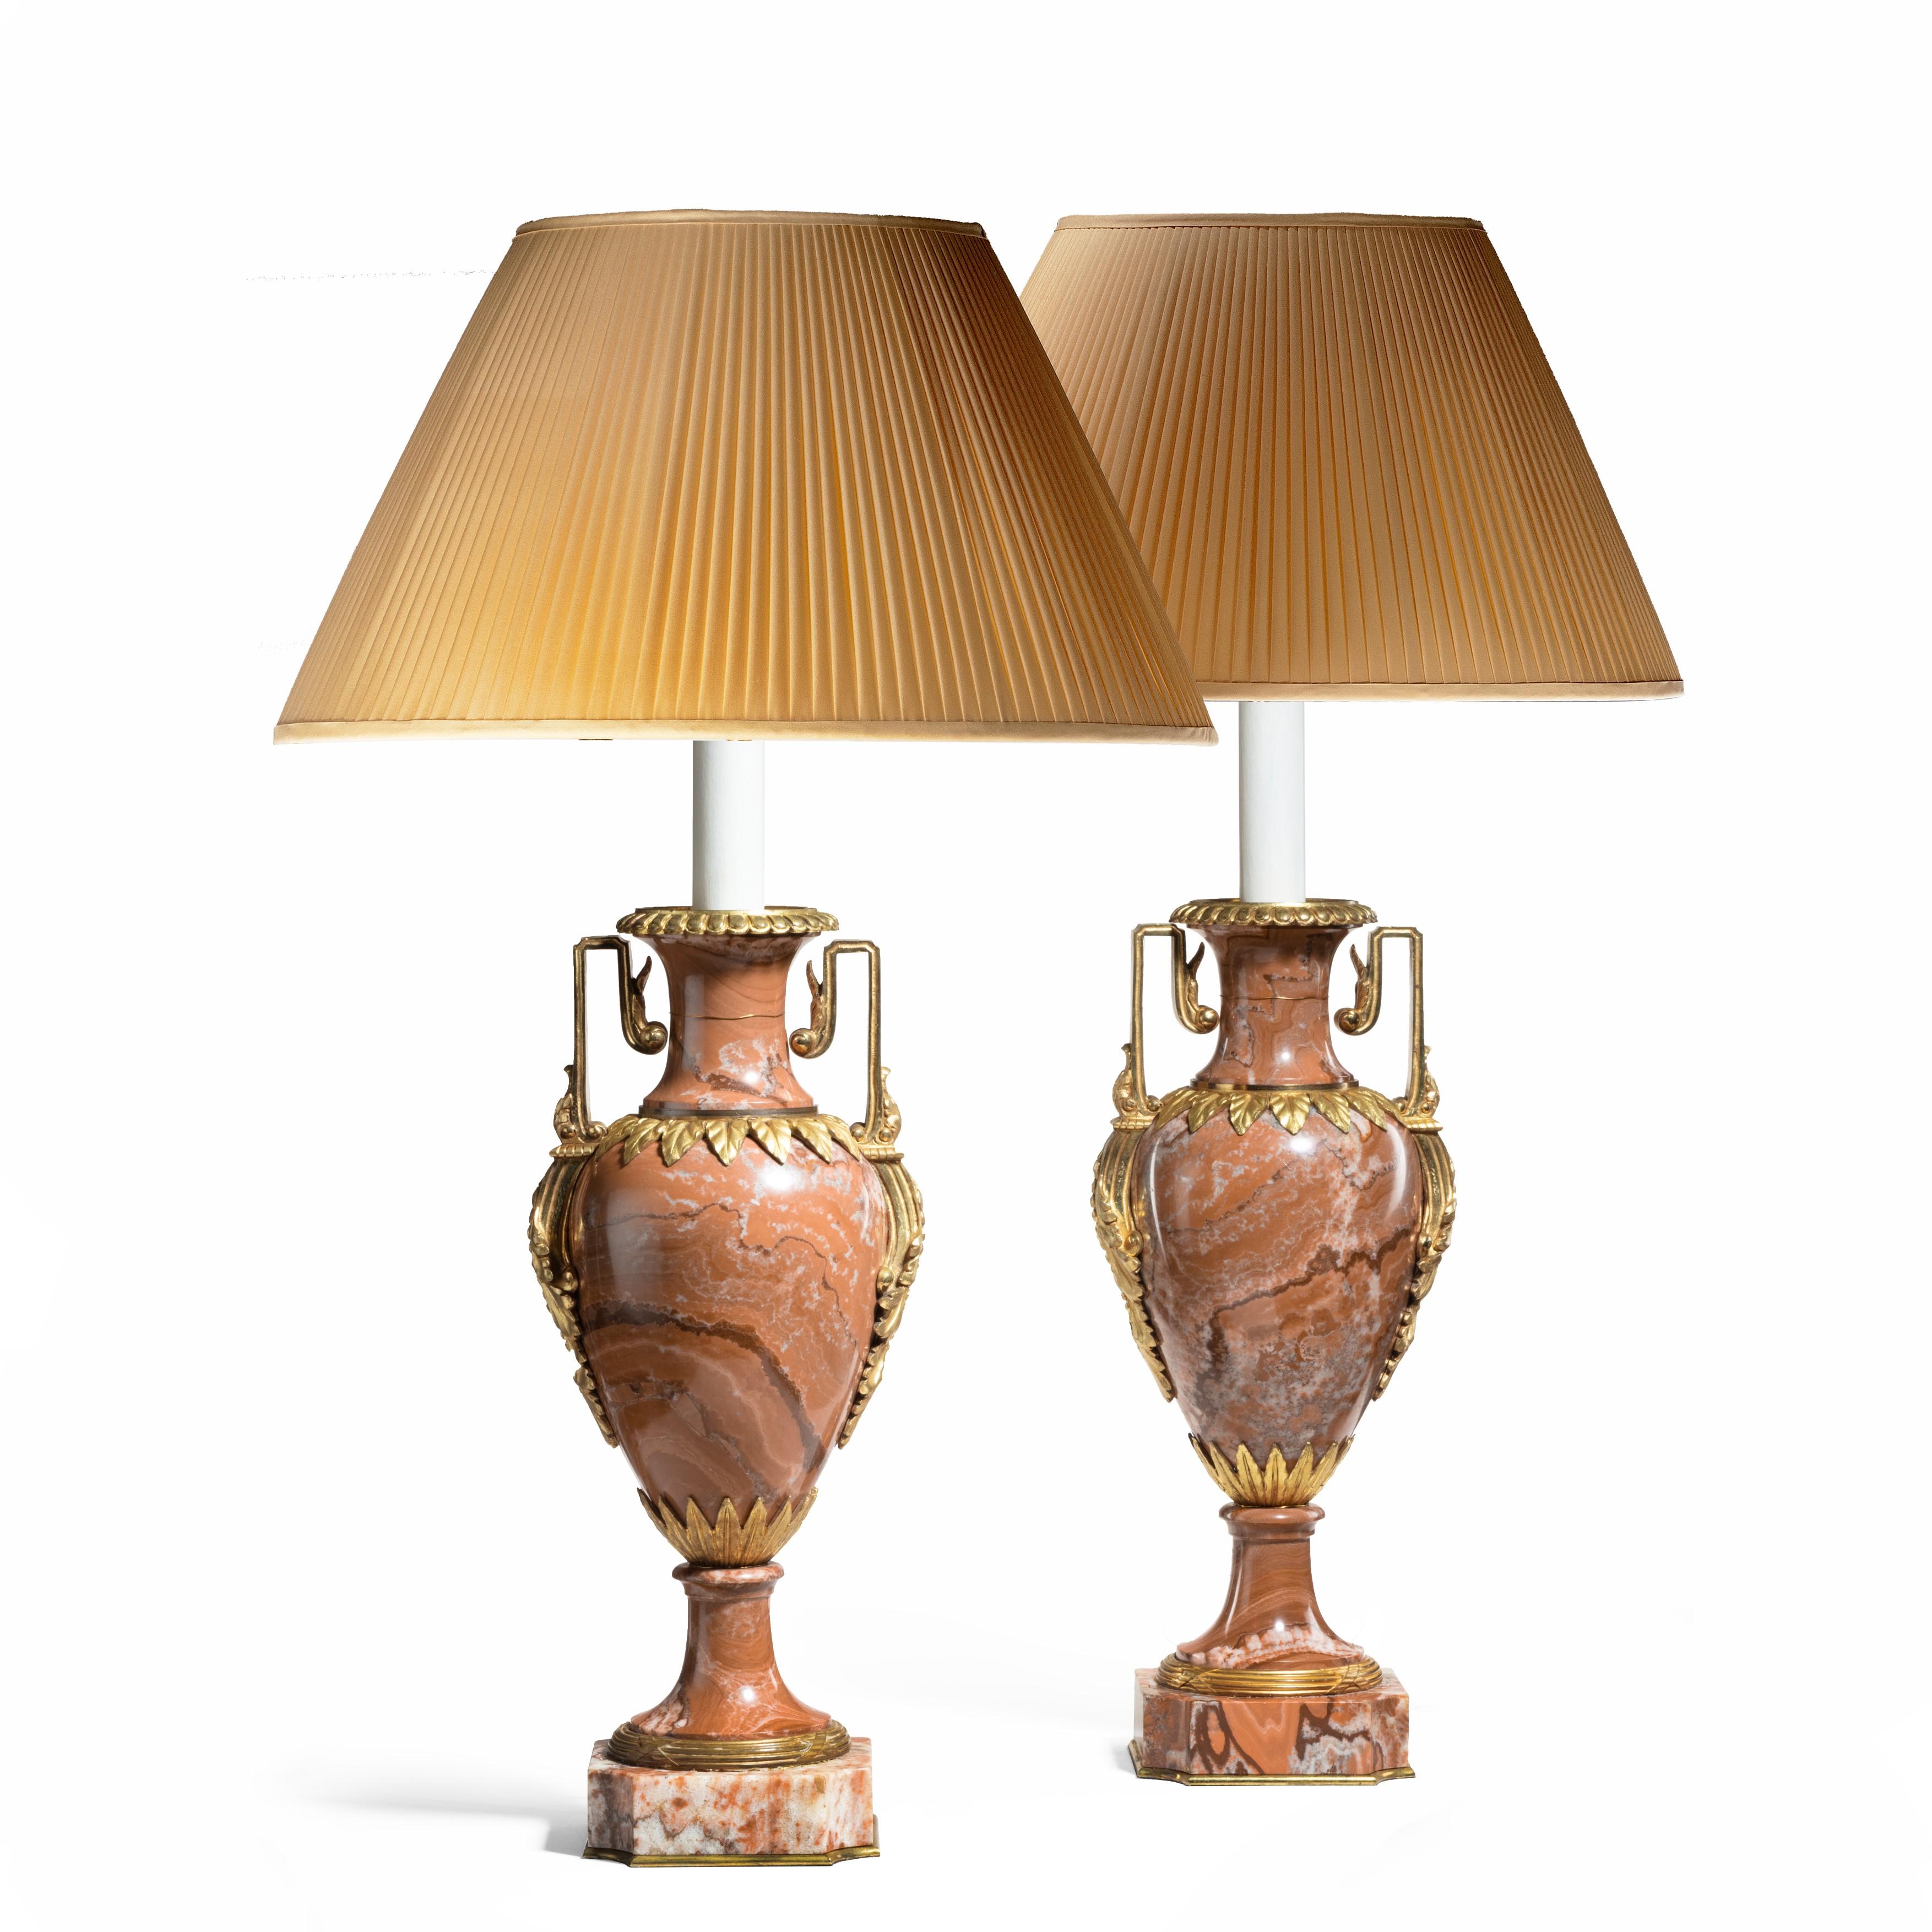 A pair of good Napoleon III rouge marble vases, each mounted in ormolu with a pair of square bracket handles and collars of pointed leaves, now fitted for electricity. French, circa 1870 (shades not included).
 